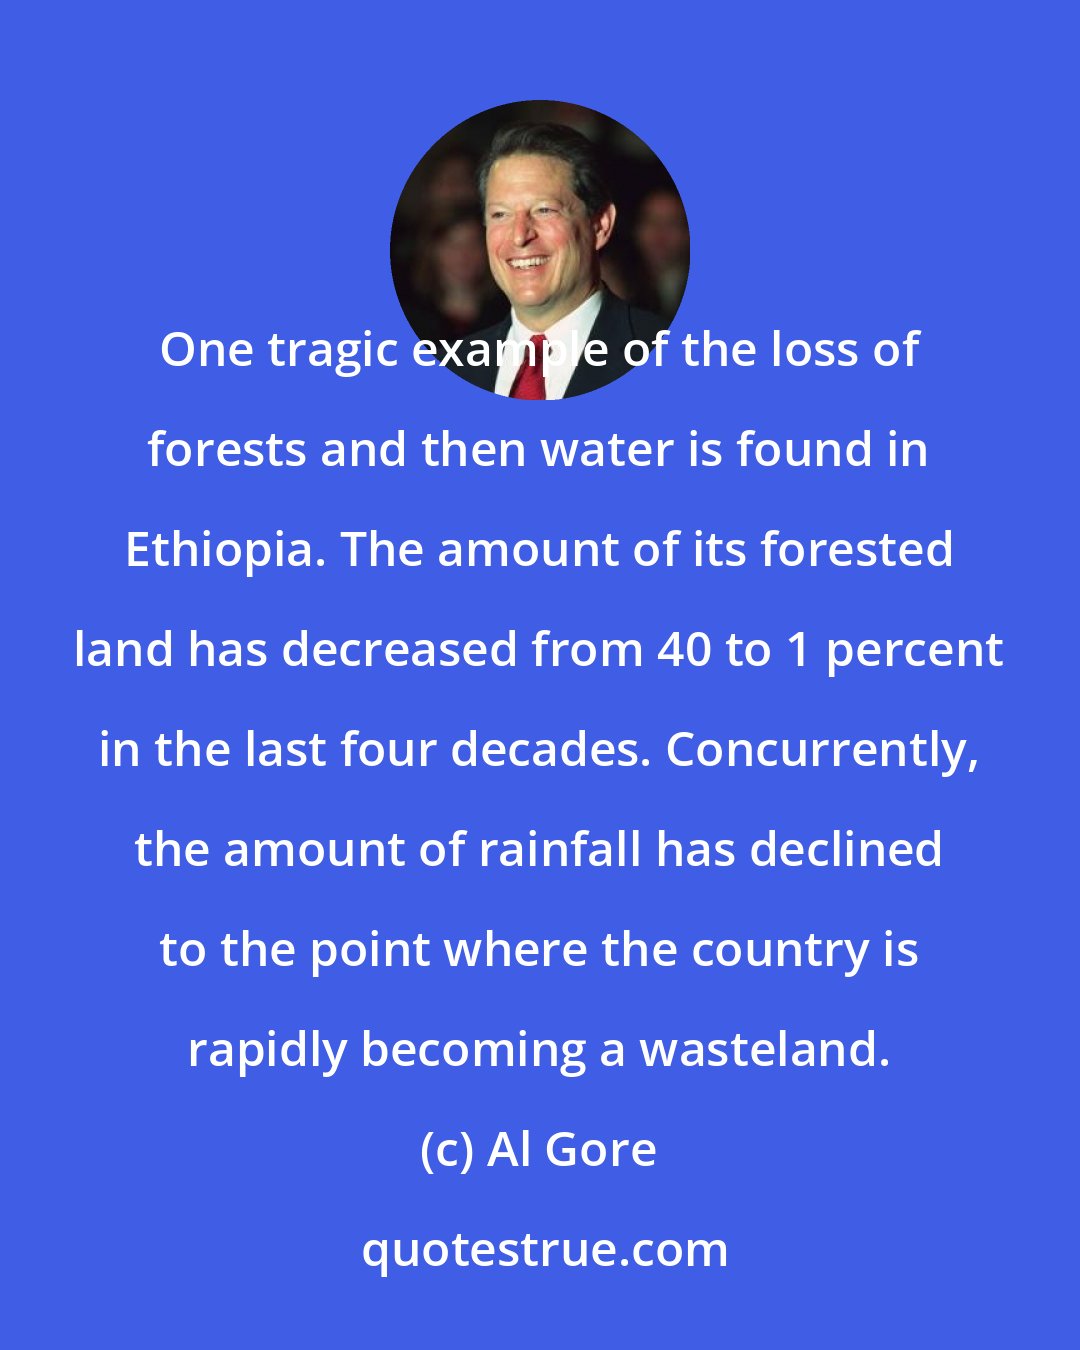 Al Gore: One tragic example of the loss of forests and then water is found in Ethiopia. The amount of its forested land has decreased from 40 to 1 percent in the last four decades. Concurrently, the amount of rainfall has declined to the point where the country is rapidly becoming a wasteland.